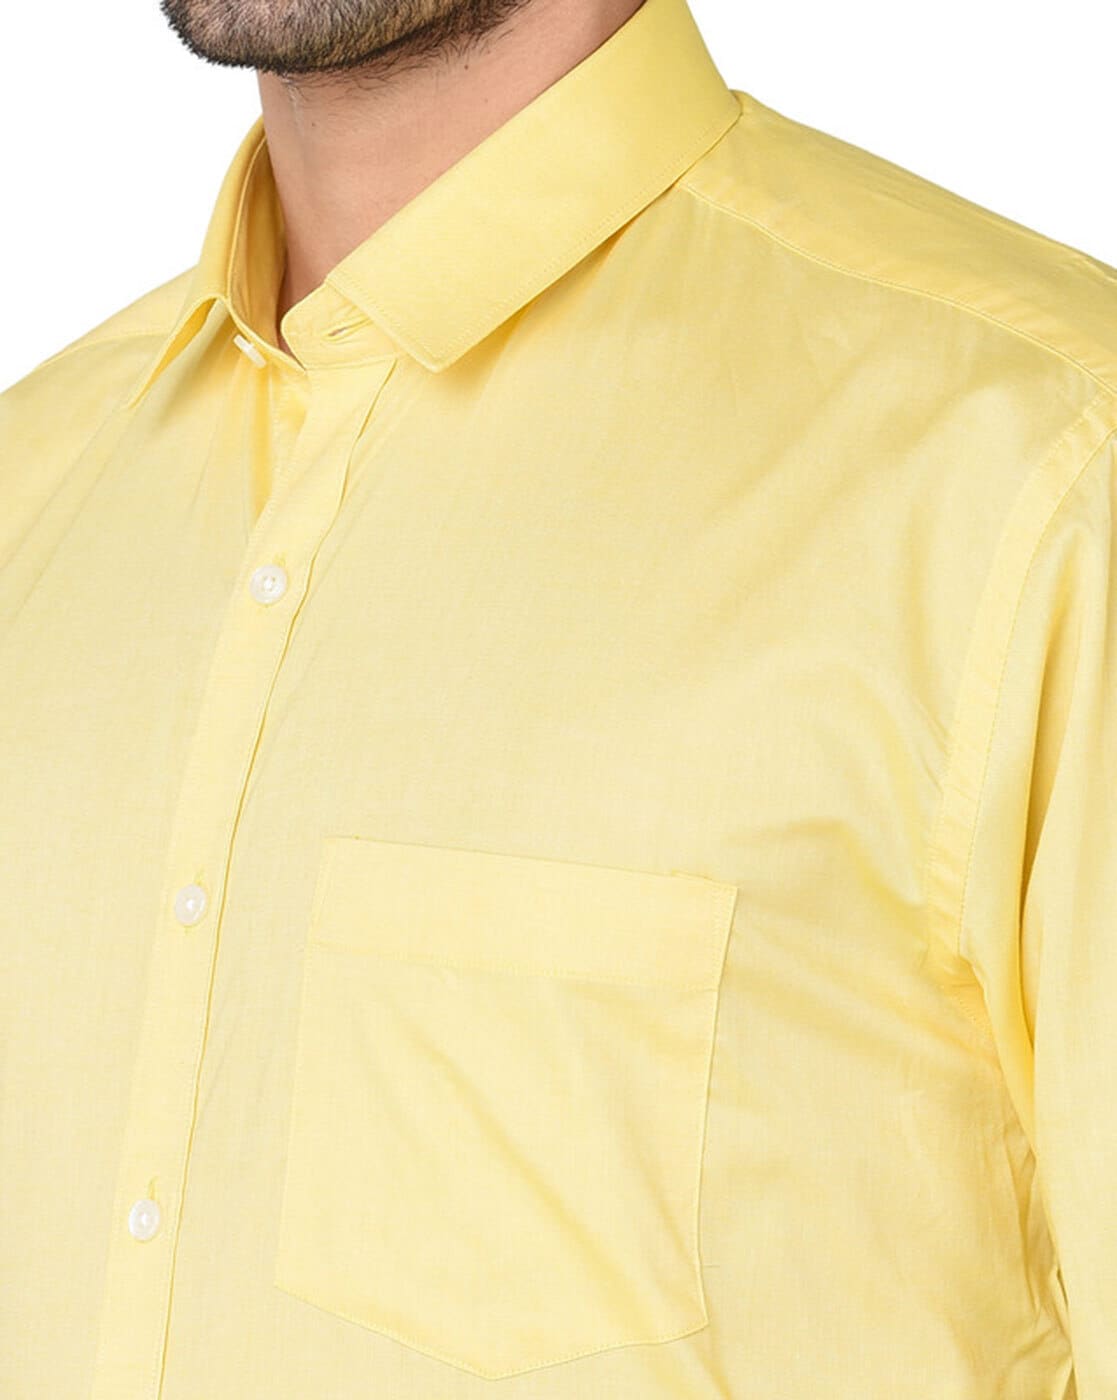 Which color pants suit a yellow shirt? - Quora